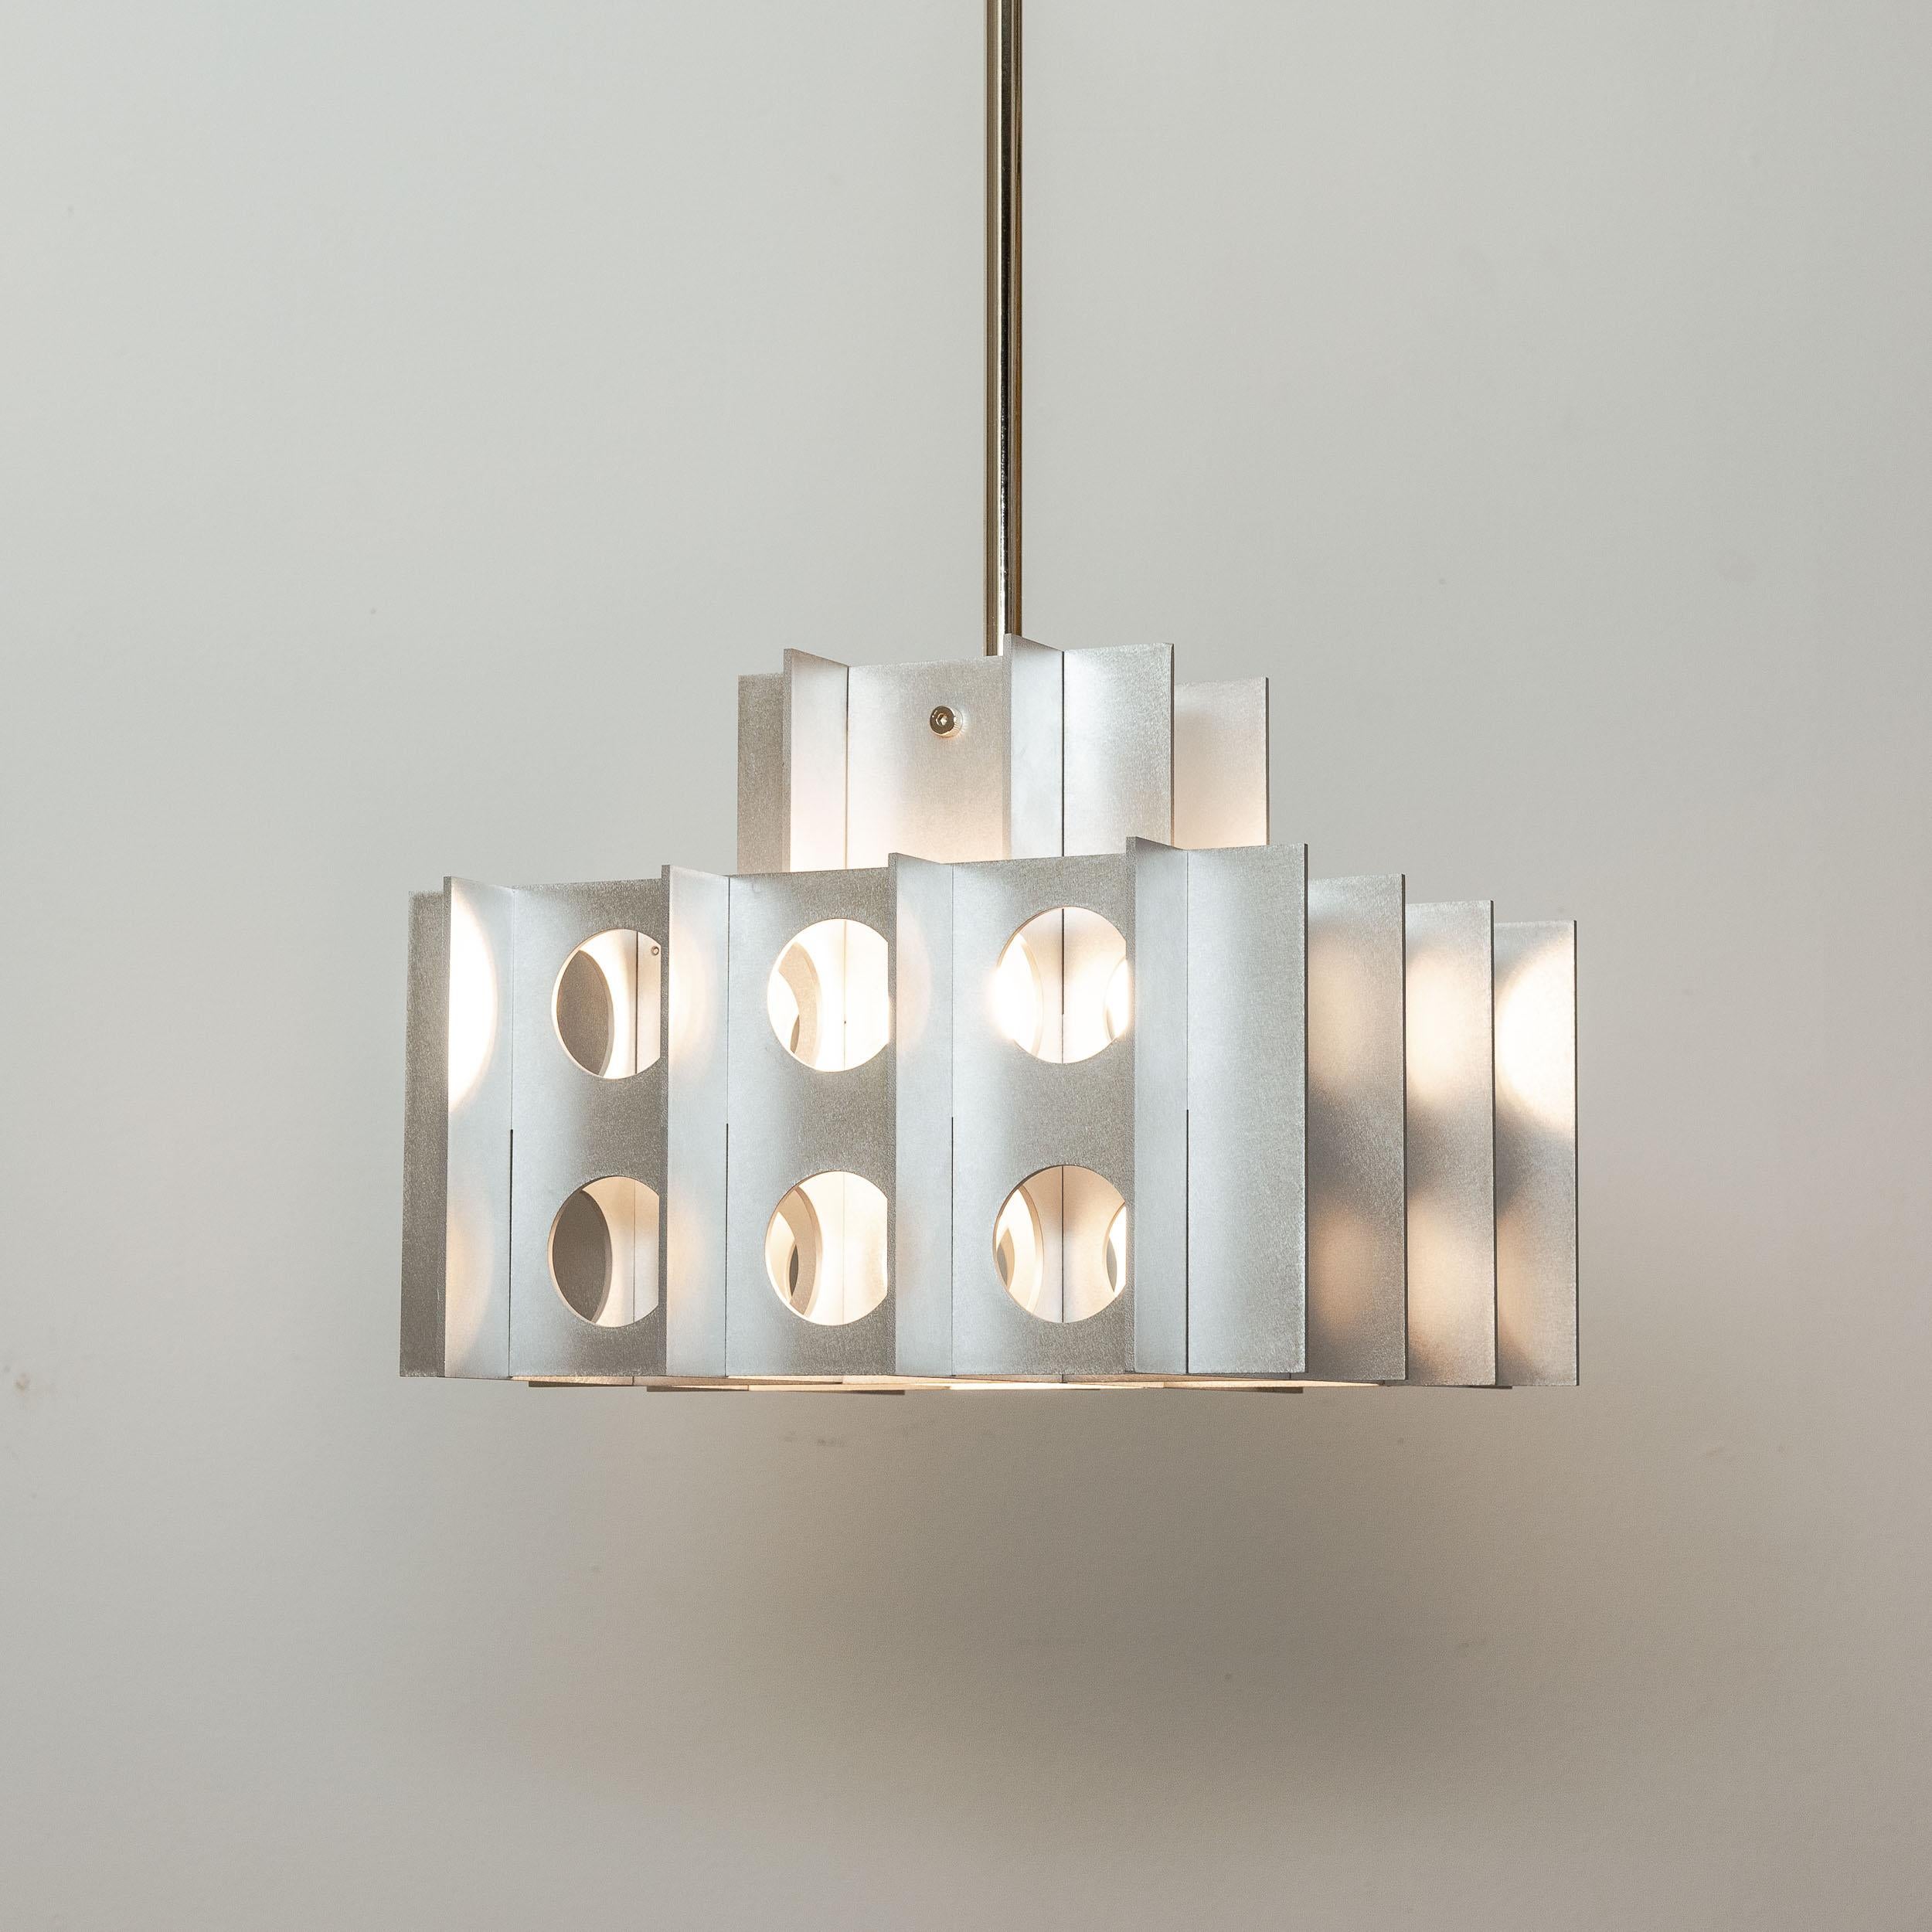 TENFOLD PENDANT 3TA 24inch by Luft Tanaka Studio

Composed of interlocking sheet metal panels, the Tenfold Series is inspired by brutalism and the 1970's architectural style. The light fixture works well as a single fixture over a dining table